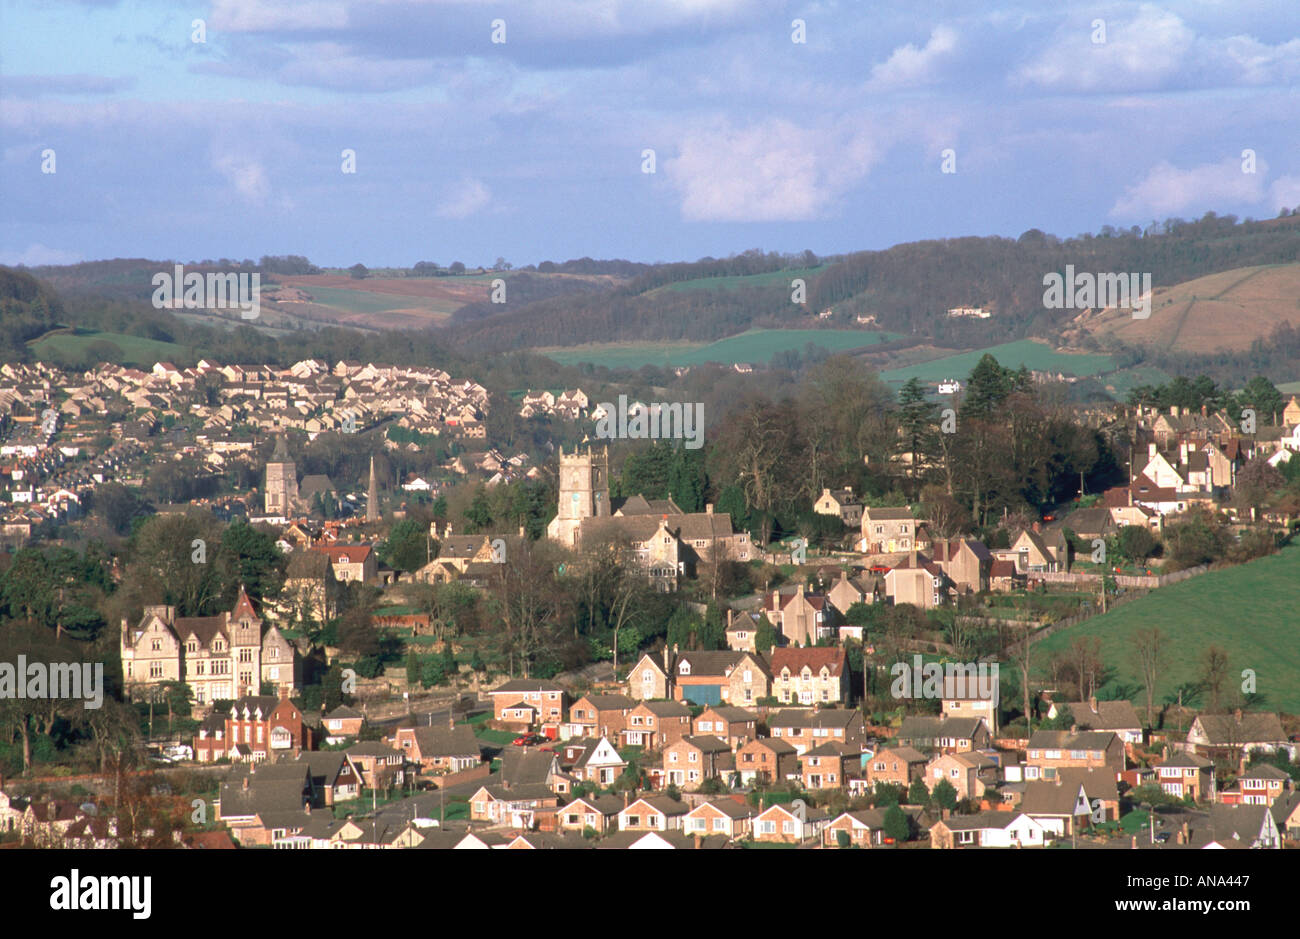 View over Rodborough in Stroud, Gloucestershire, Cotswolds, England, UK, Europe Stock Photo